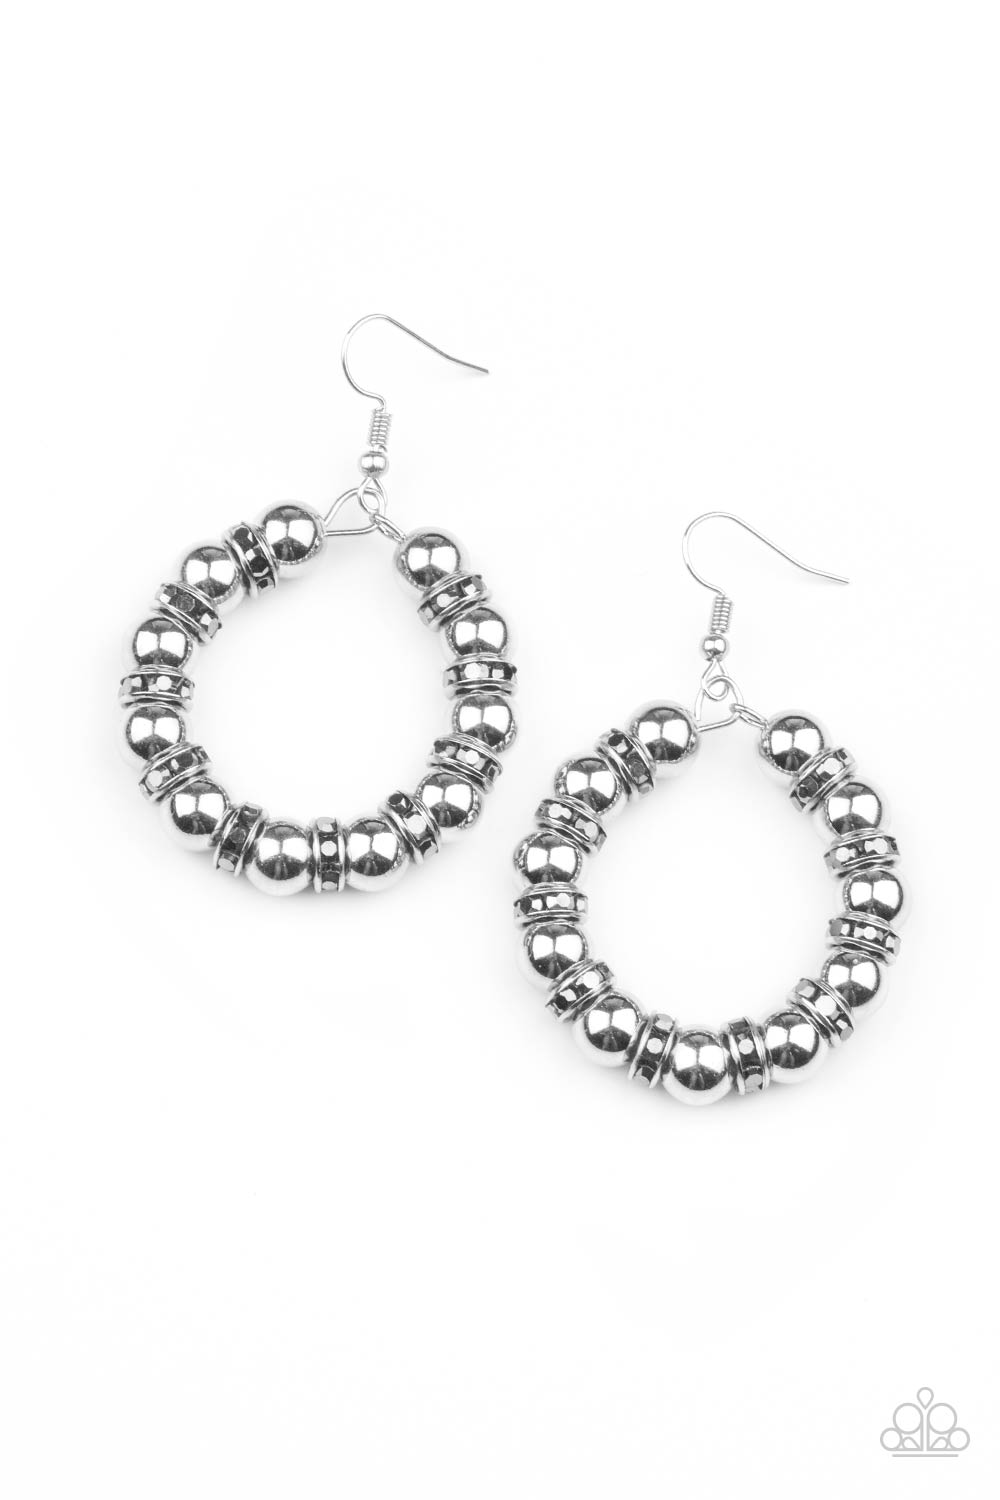 shop-sassy-affordable- cosmic-halo-silver-paparazzi-accessories